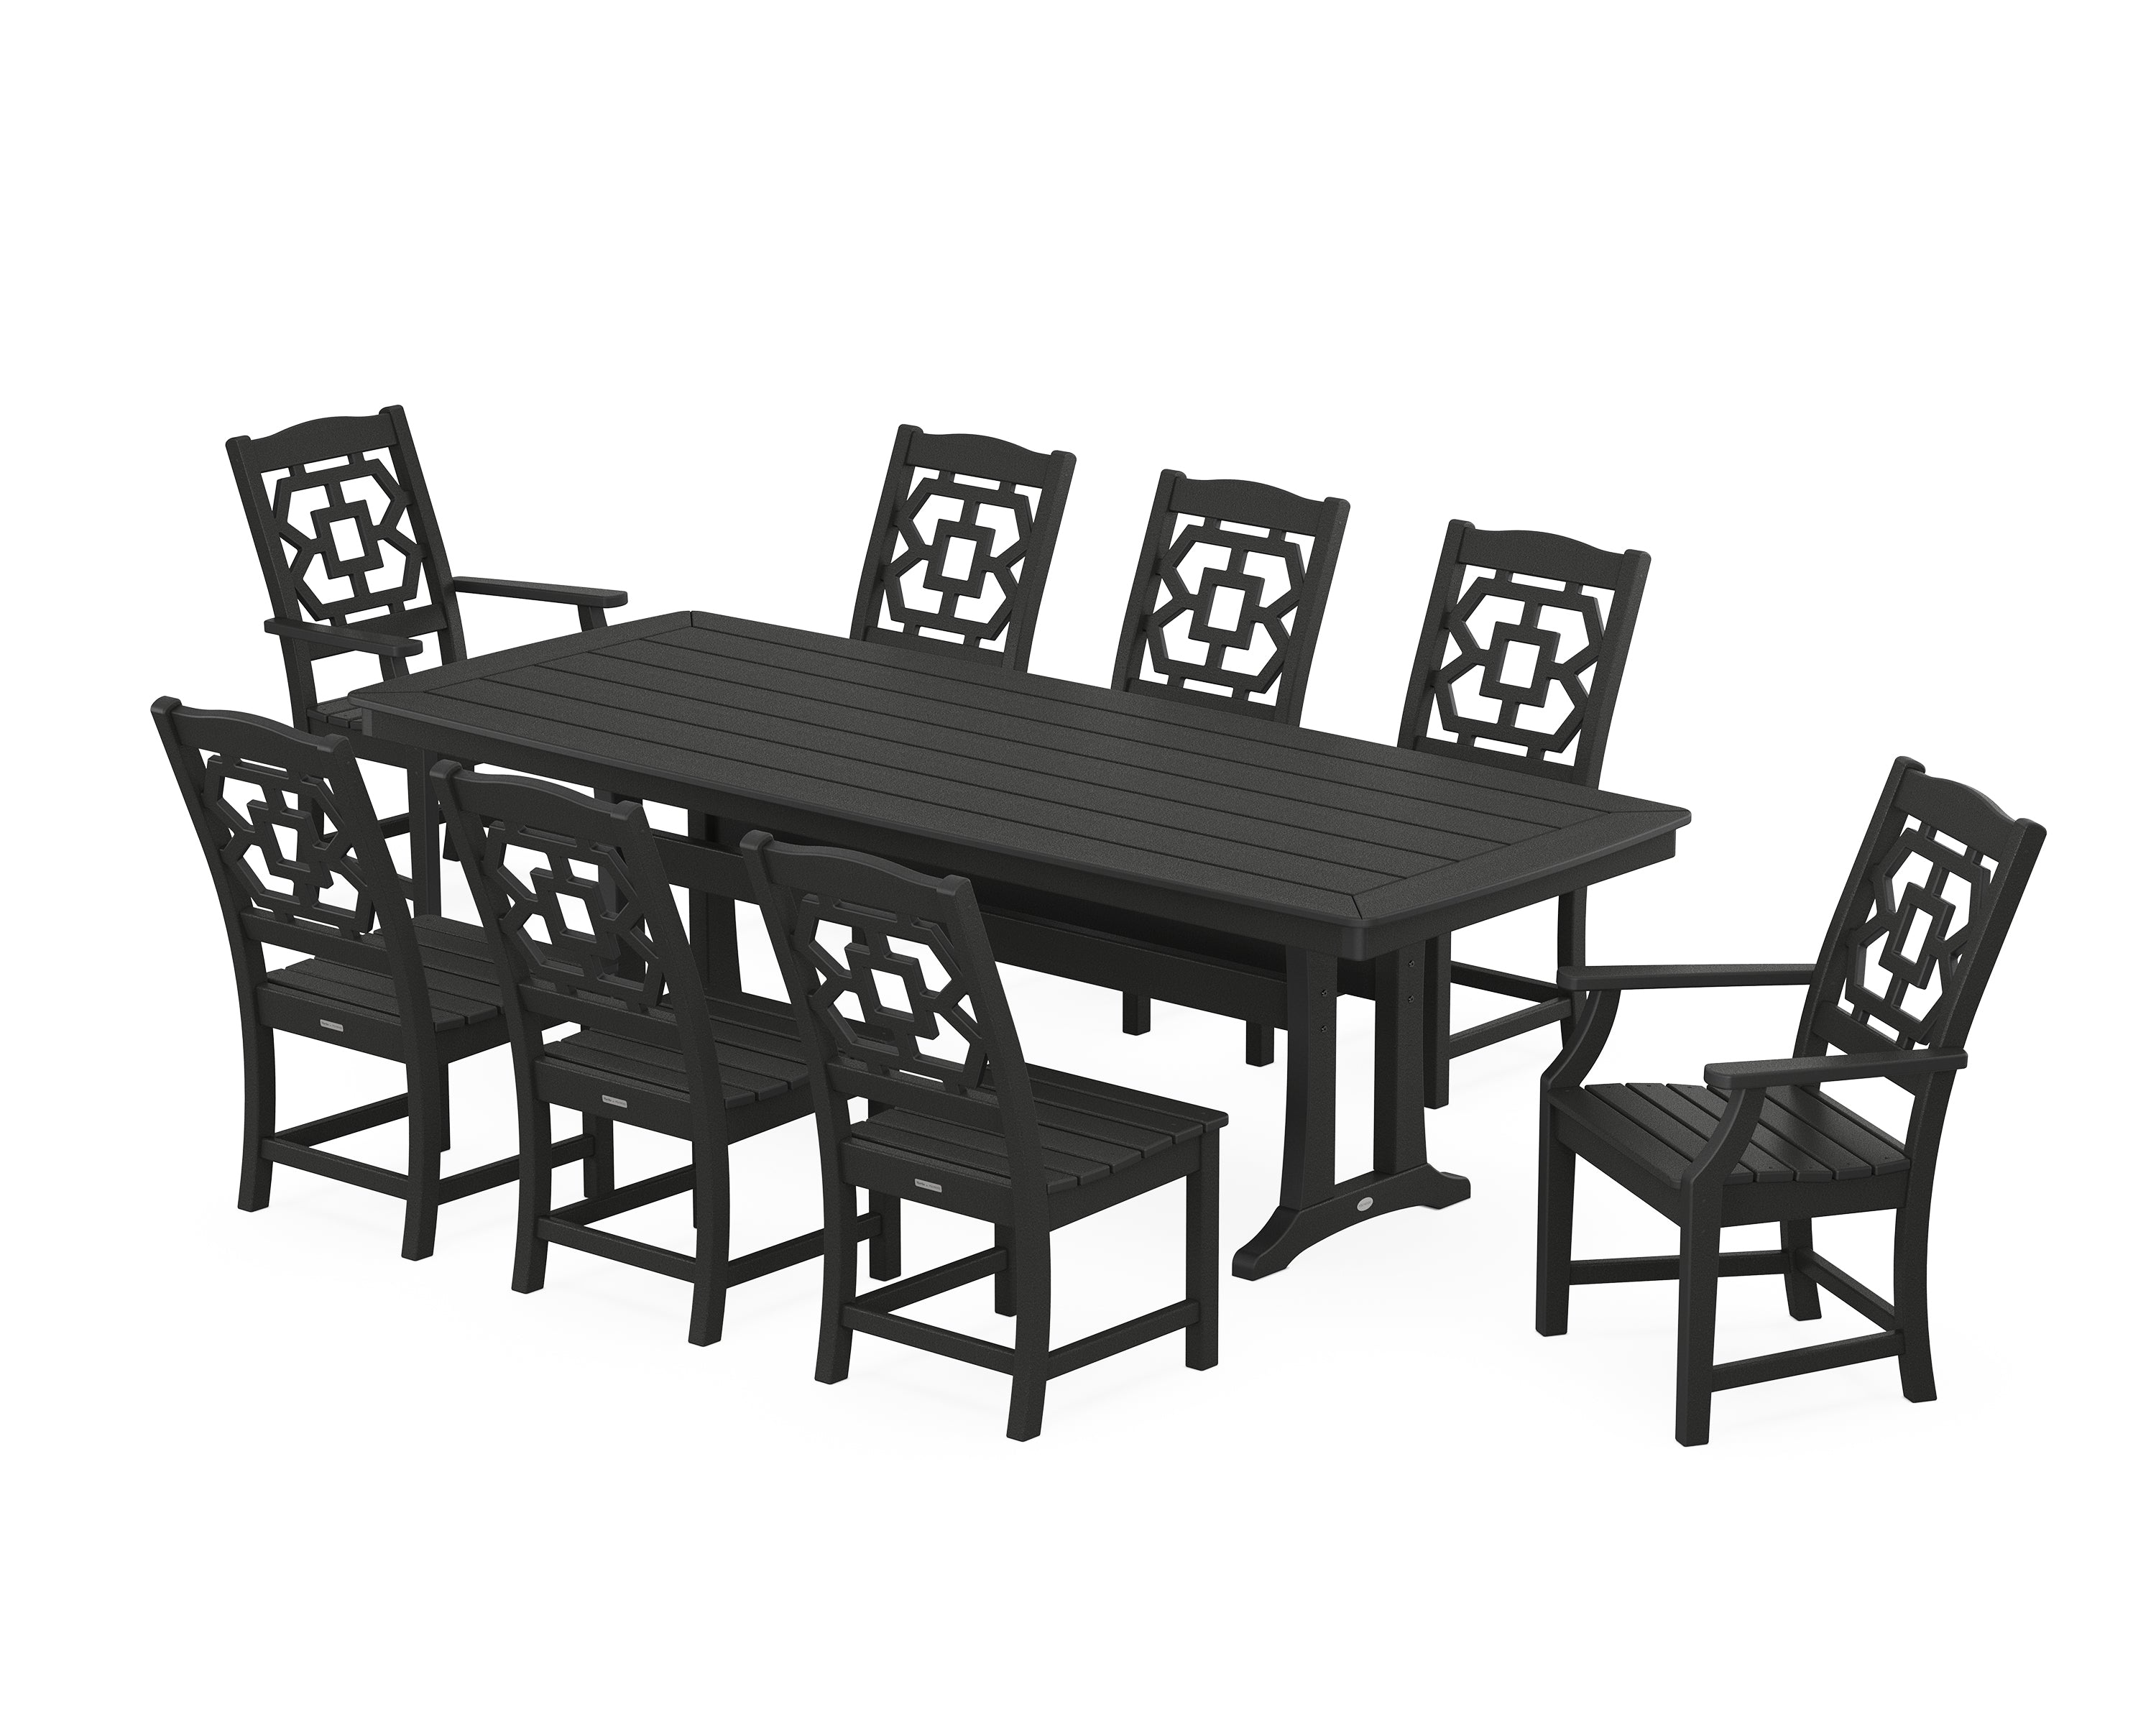 Martha Stewart by POLYWOOD® Chinoiserie 9-Piece Dining Set with Trestle Legs in Black